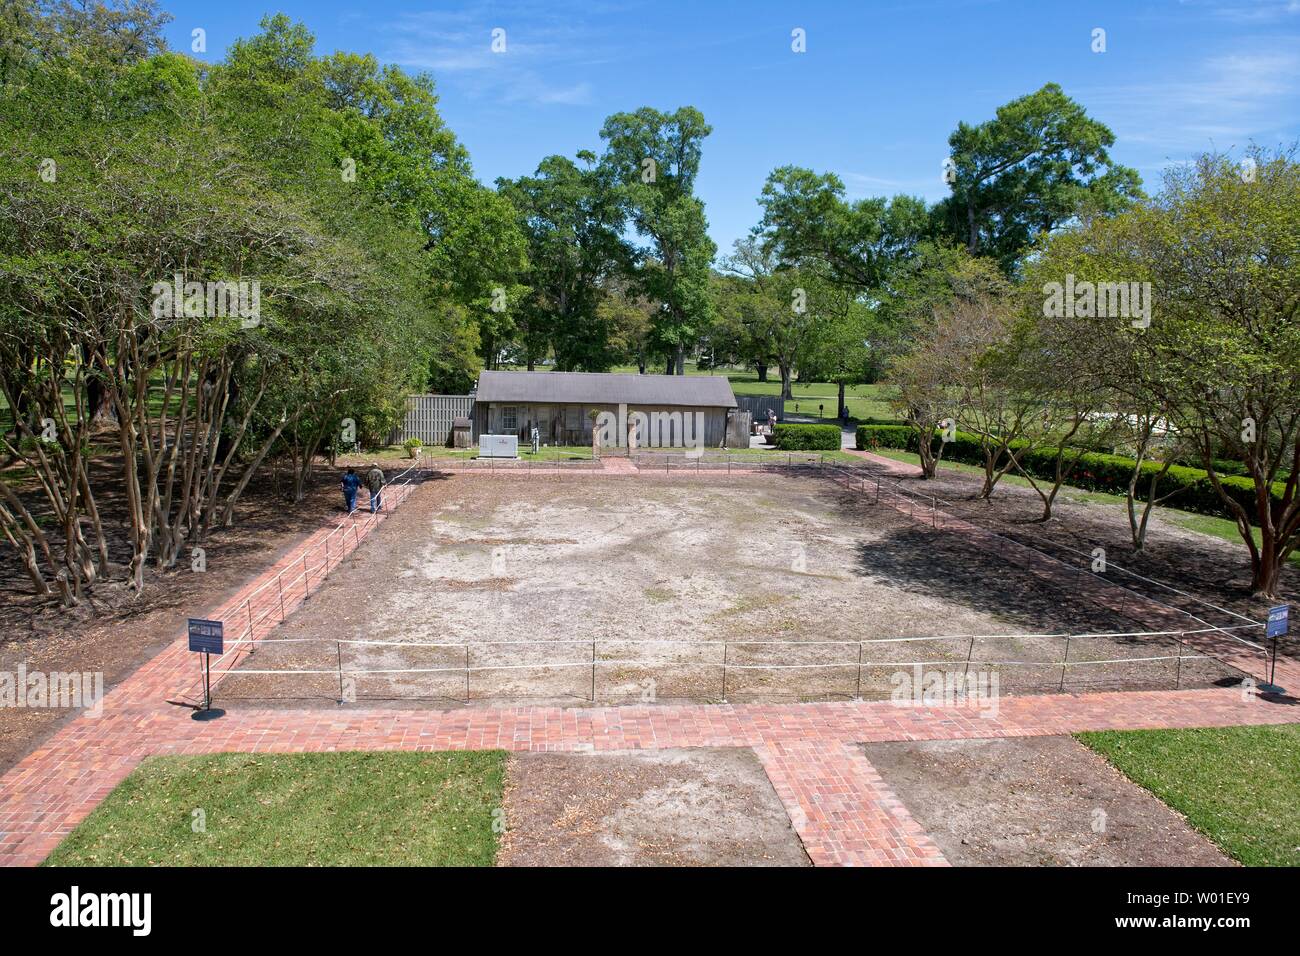 Garden area with brick walk path at Oak Alley Plantation a historic former site of a sugarcane plantation Stock Photo